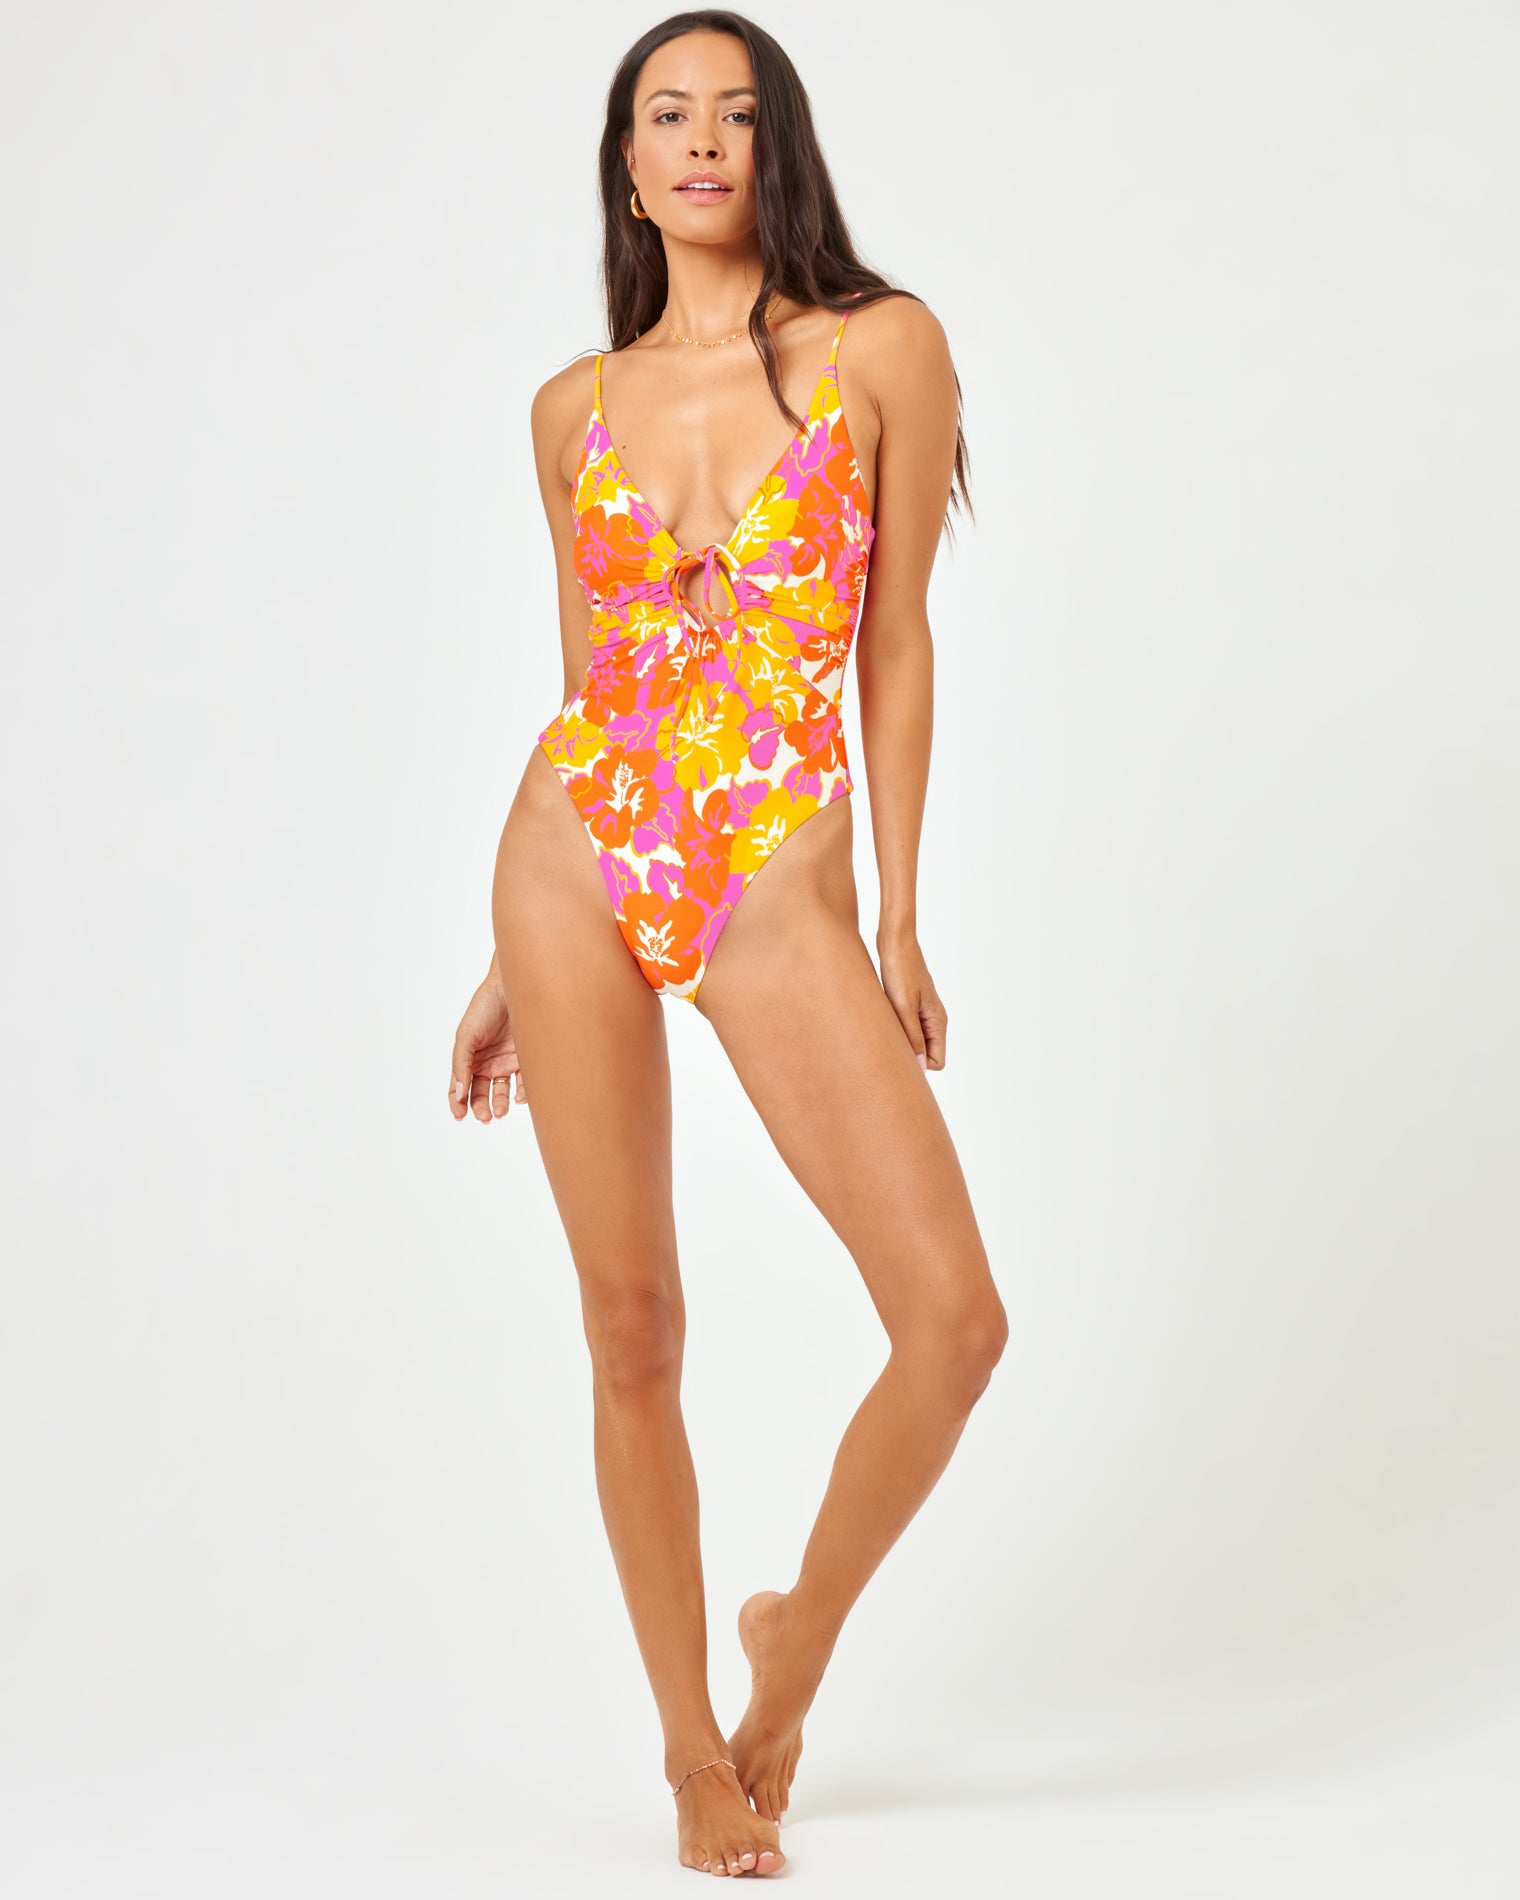 Eco Chic Econyl® Eco Piper One Piece Swimsuit - Bliss and Blossom Bliss and Blossom | Model: Emily (size: S)